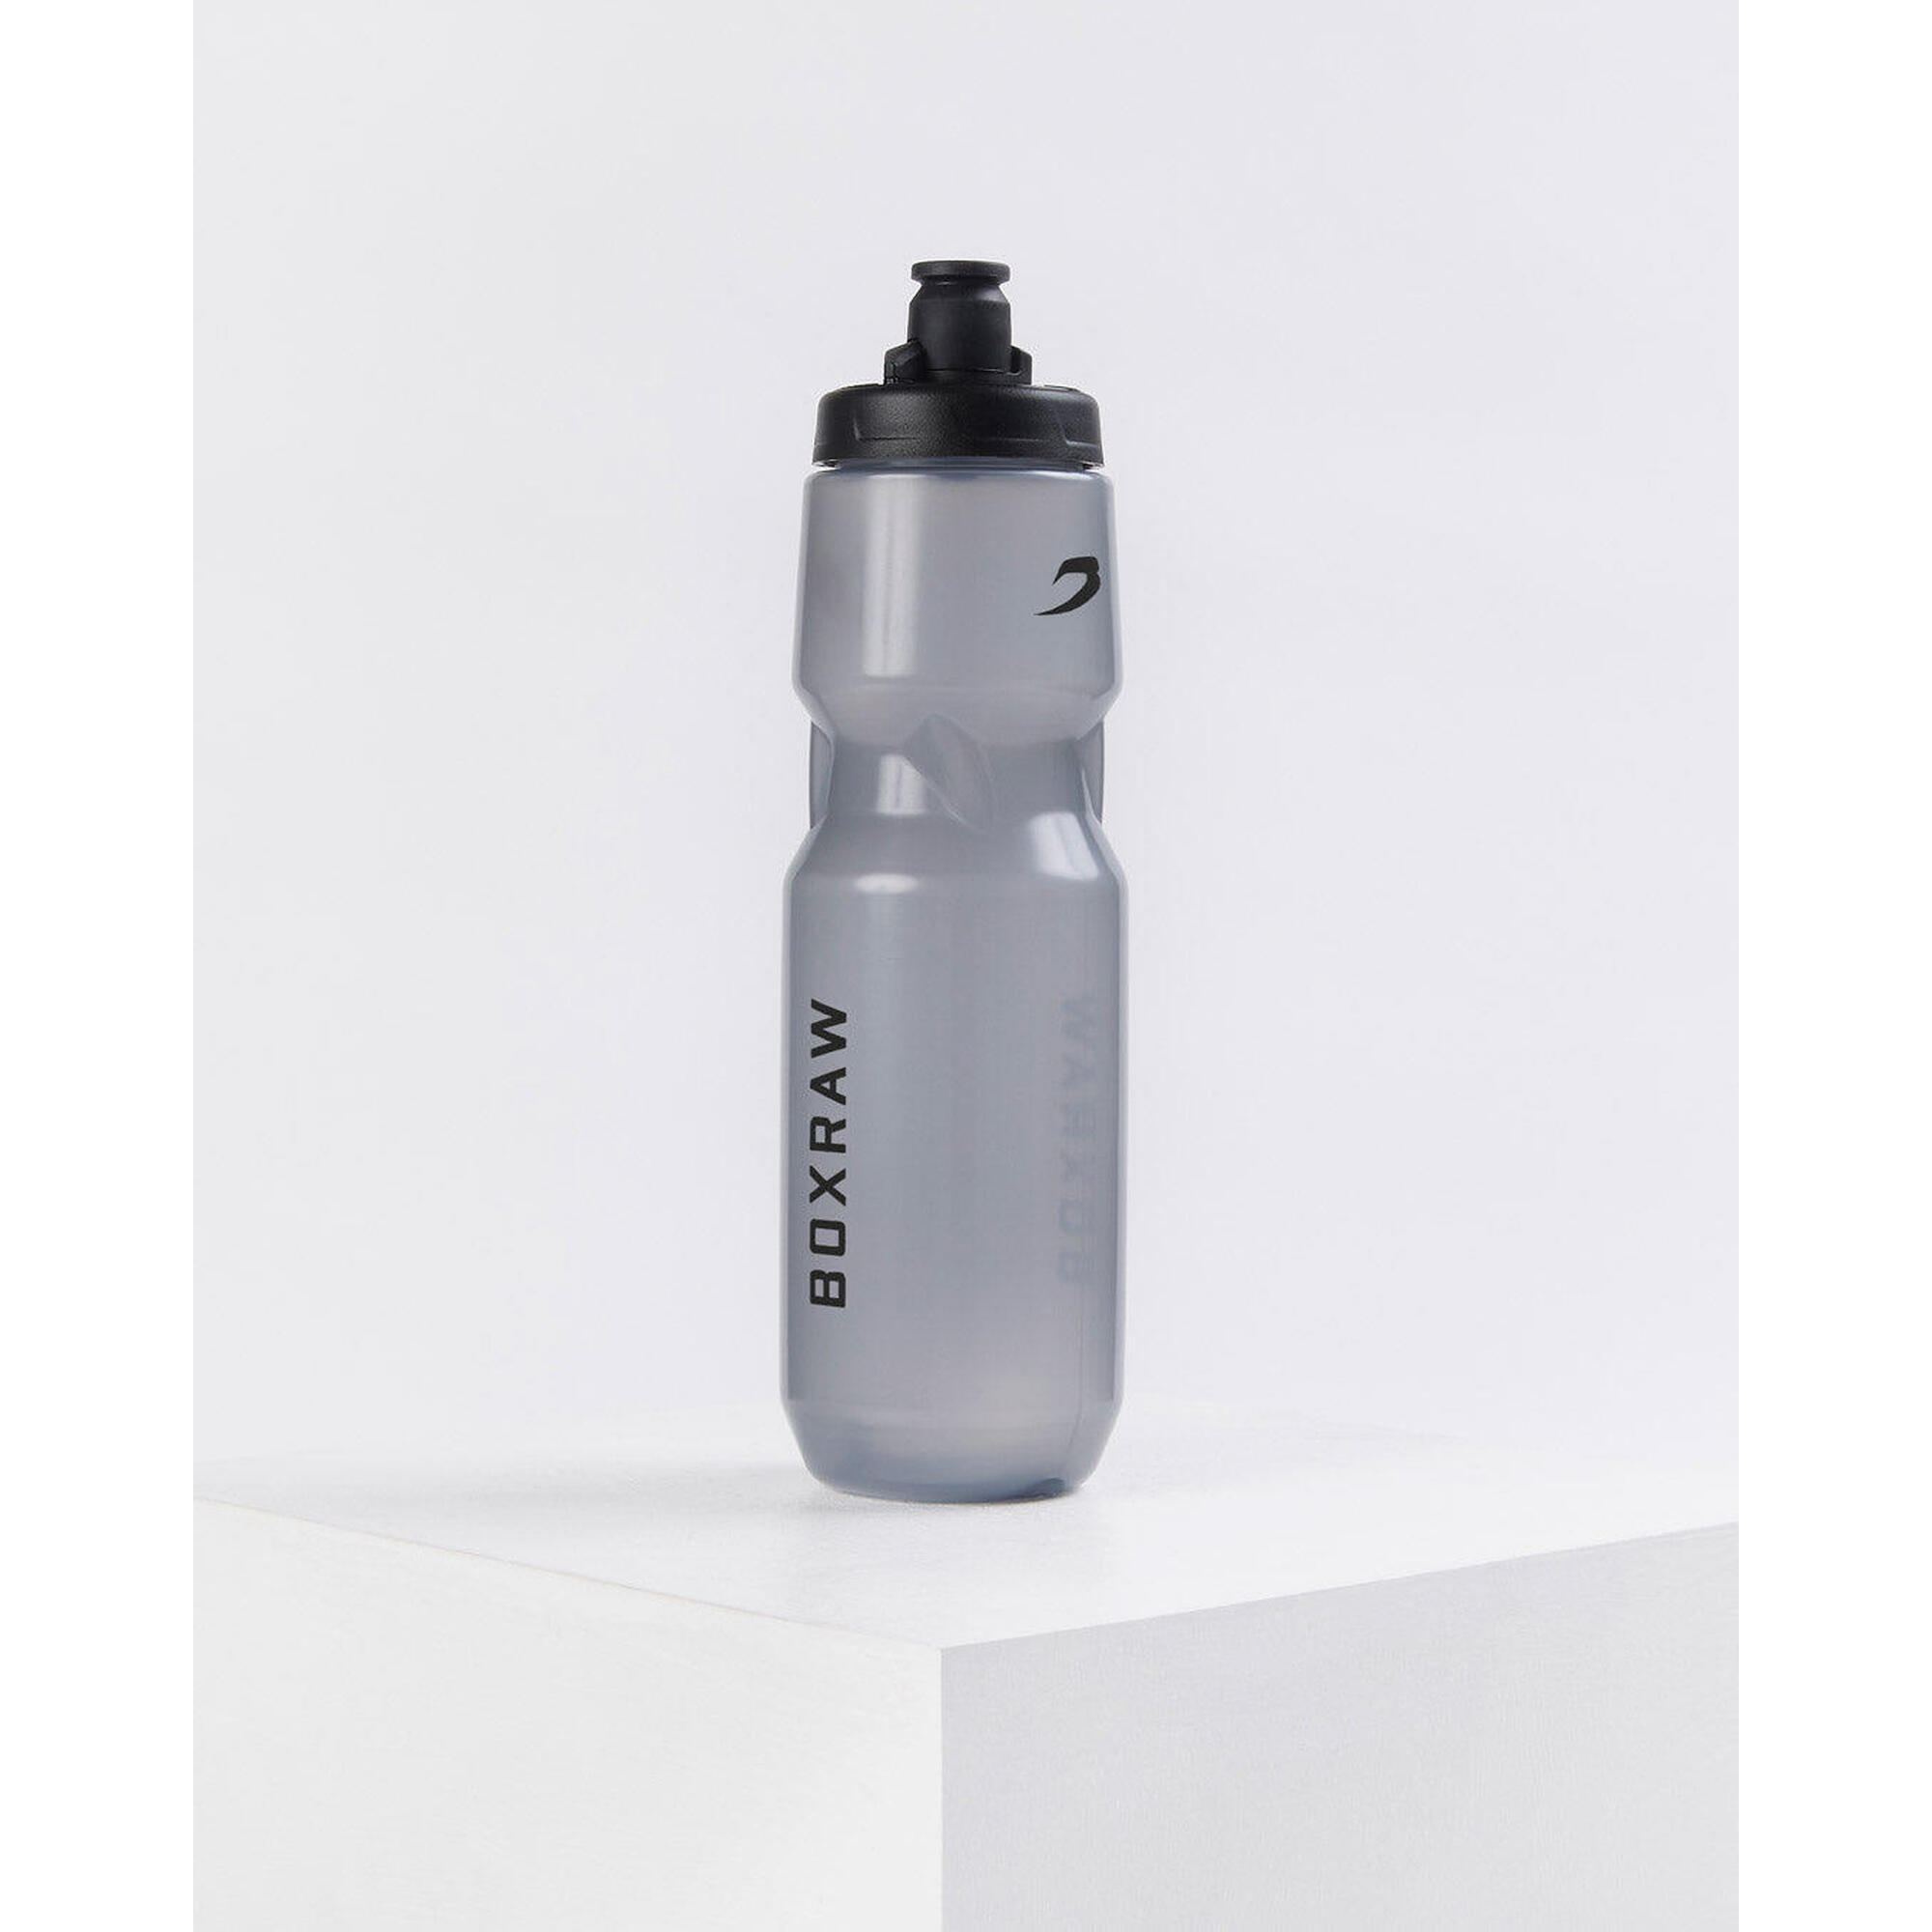 BOXRAW BOXRAW 1L Water Bottle - Frosted Black